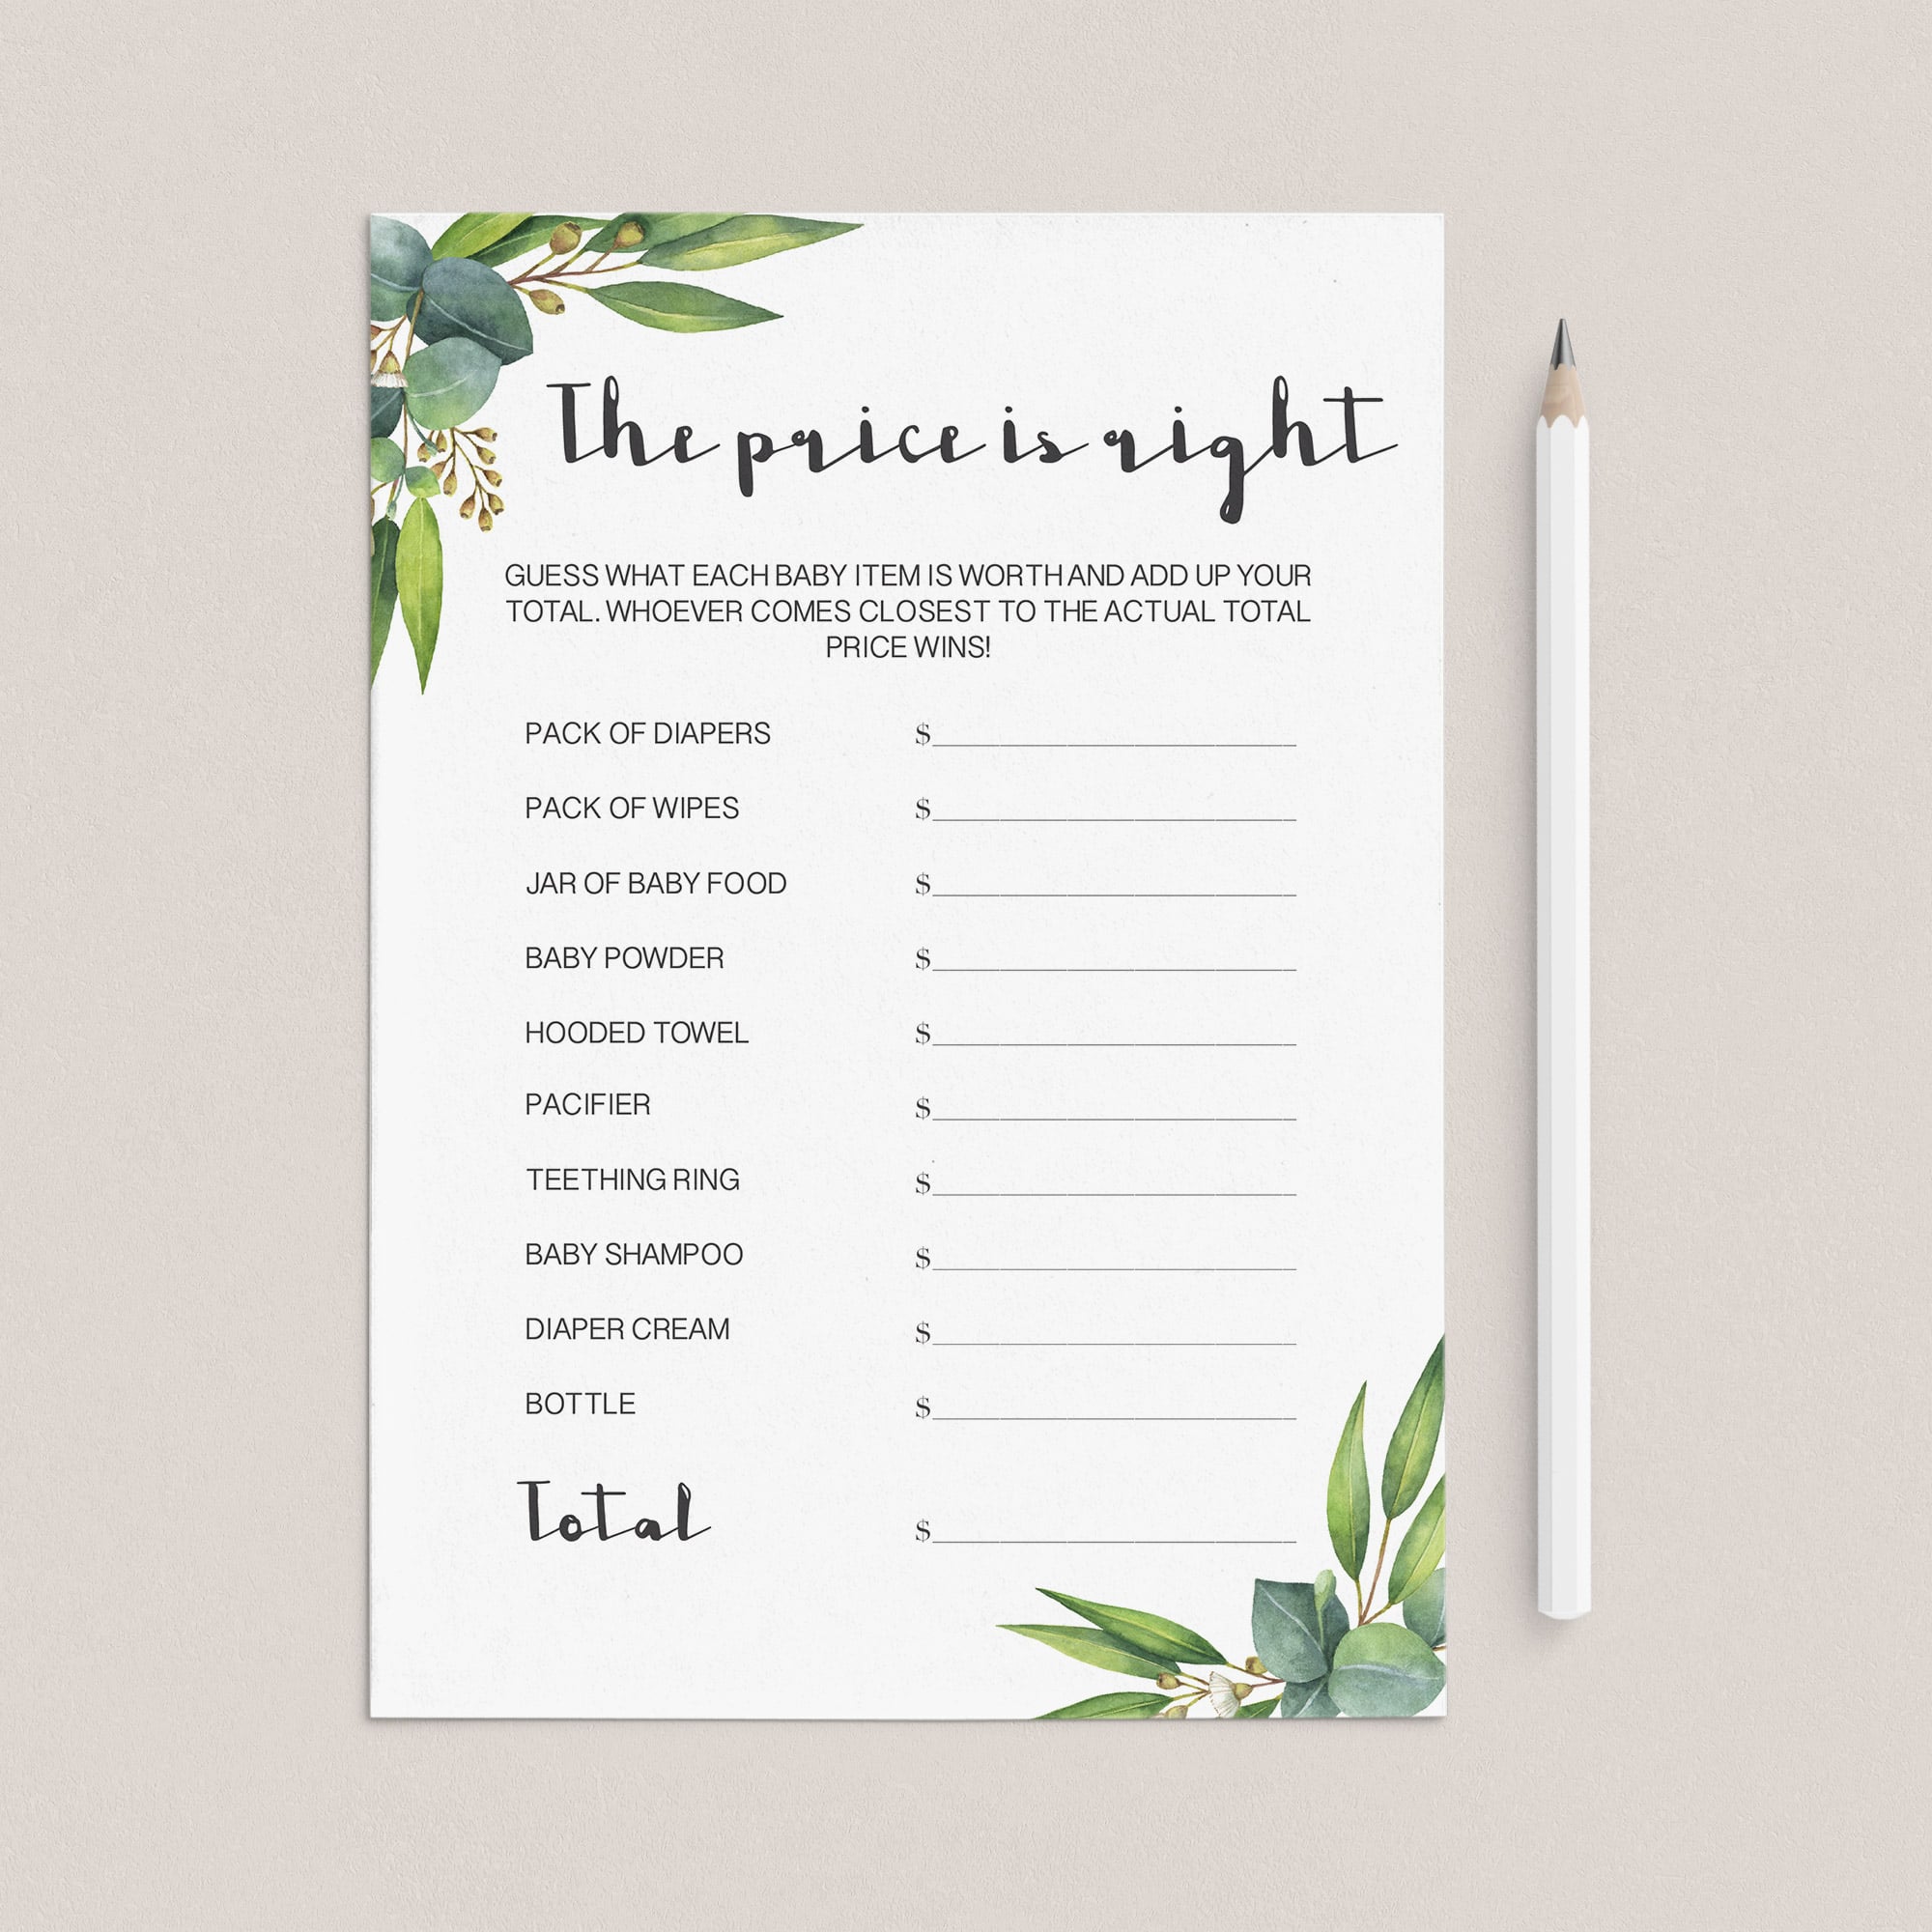 Eucalyptus baby shower game the price is right printable by LittleSizzle